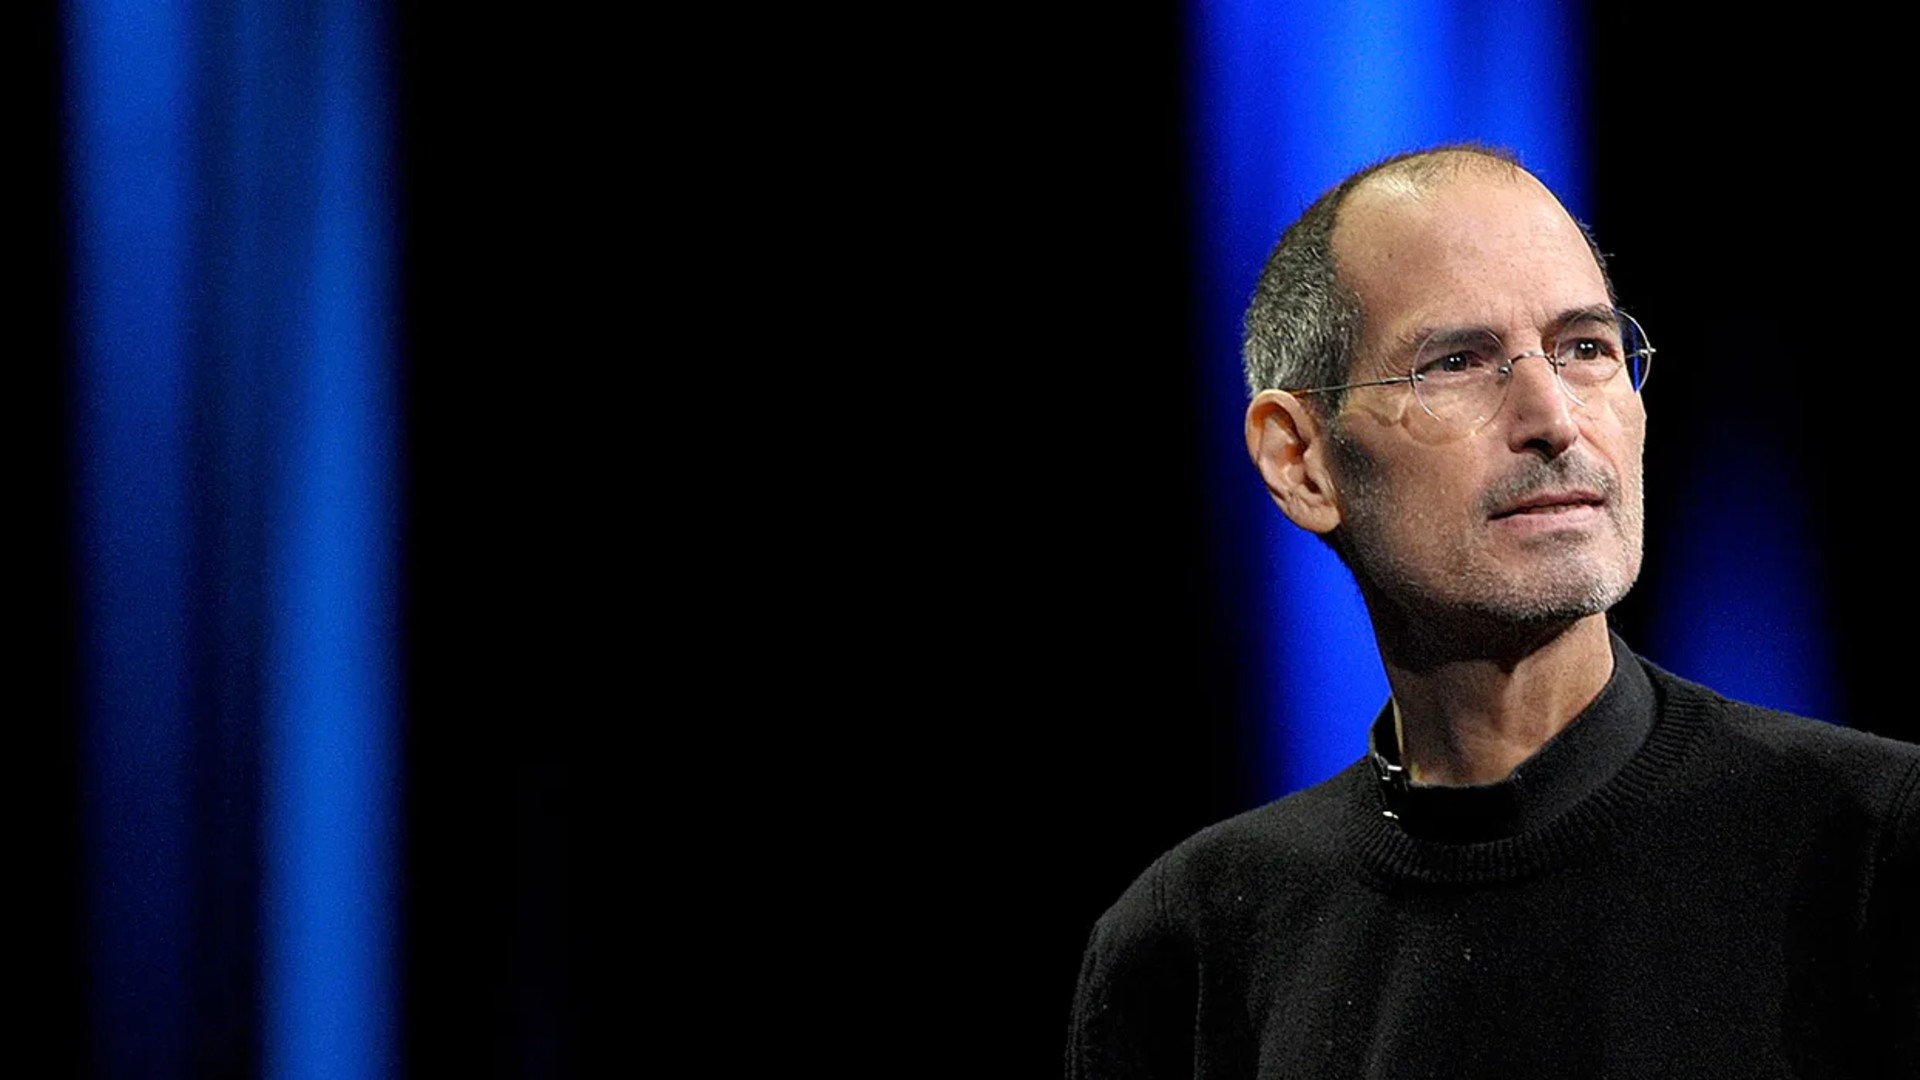 With Just 2 Sentences, Steve Jobs Revealed a Beautiful Truth About Making Mistakes